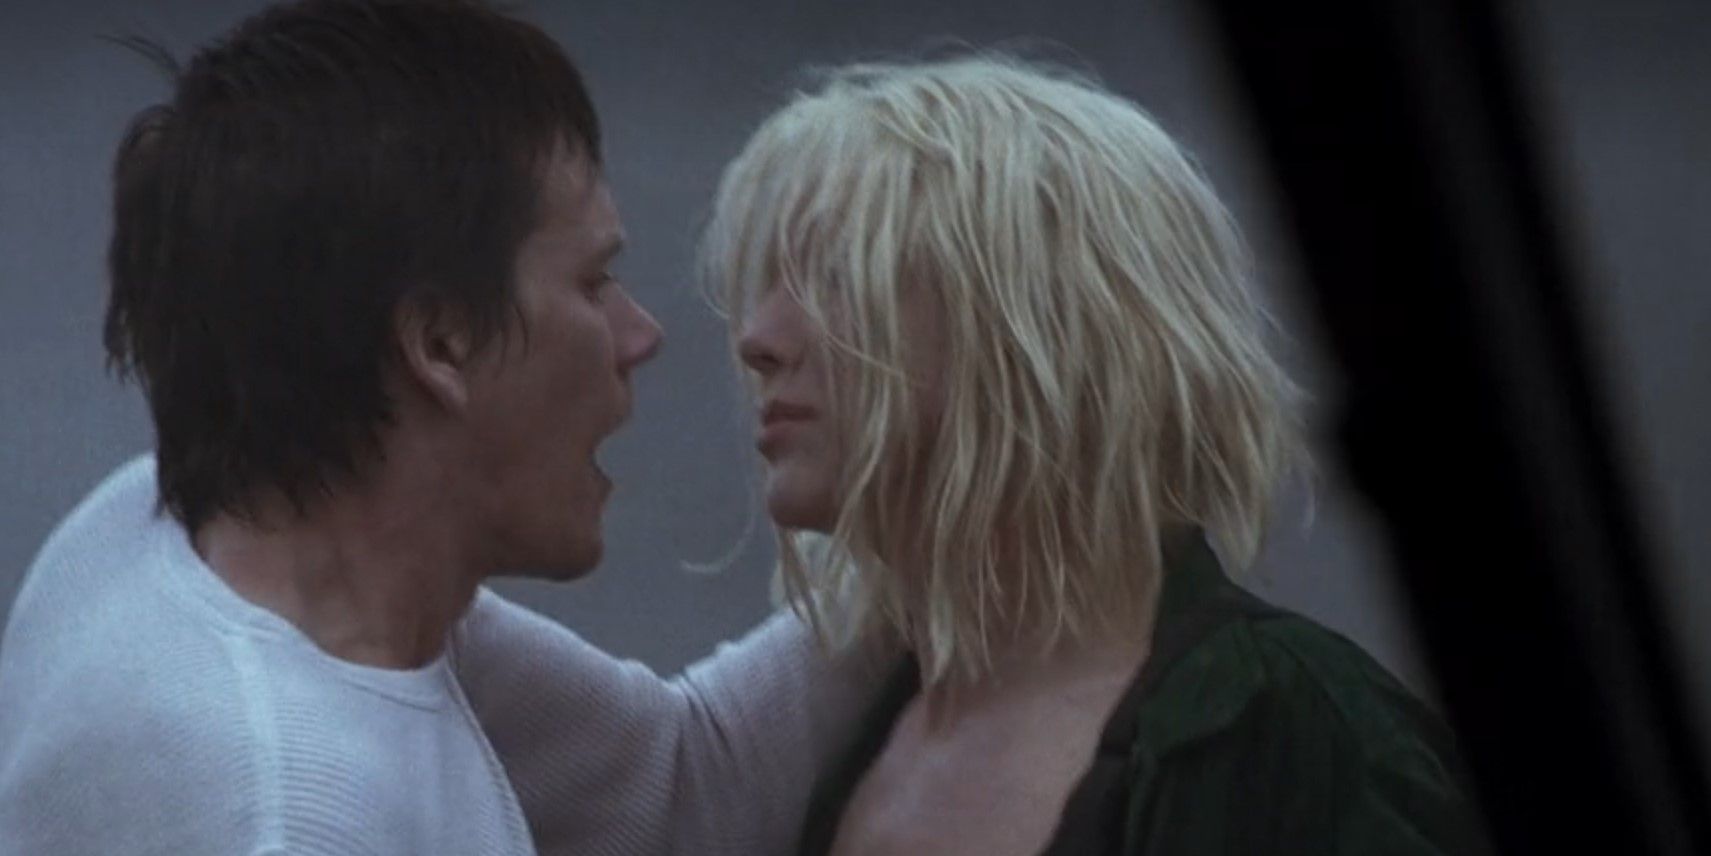 Joe (Kevin Bacon) and Cheryl (Courtney Love) in 